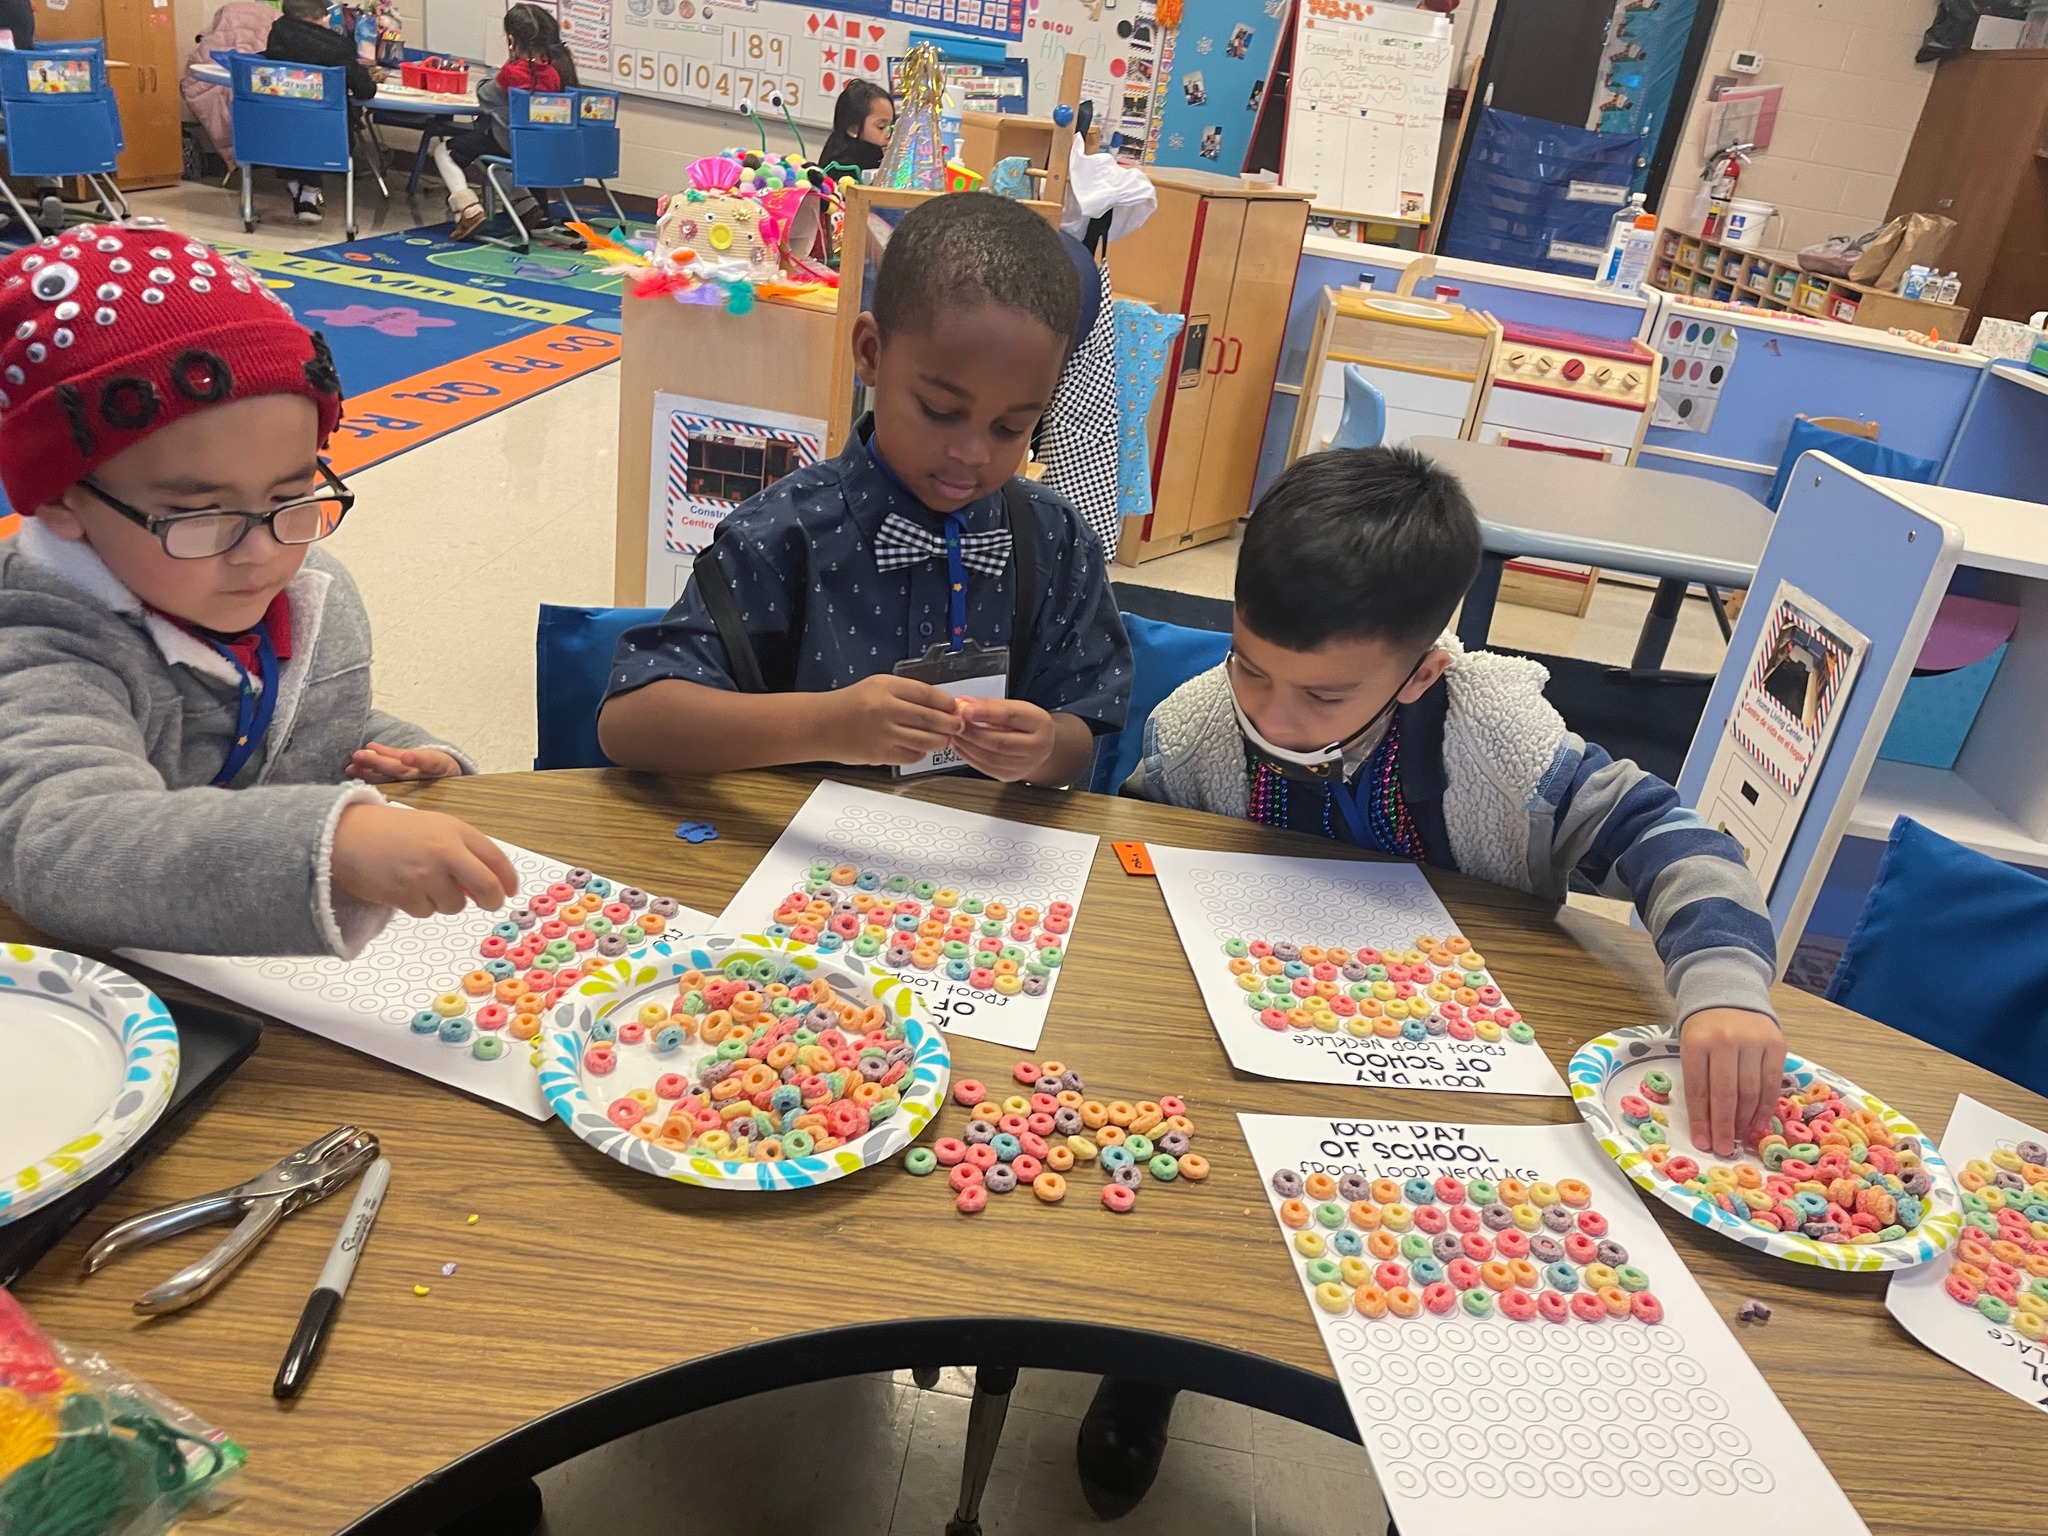 Students celebrating the 100th day of school